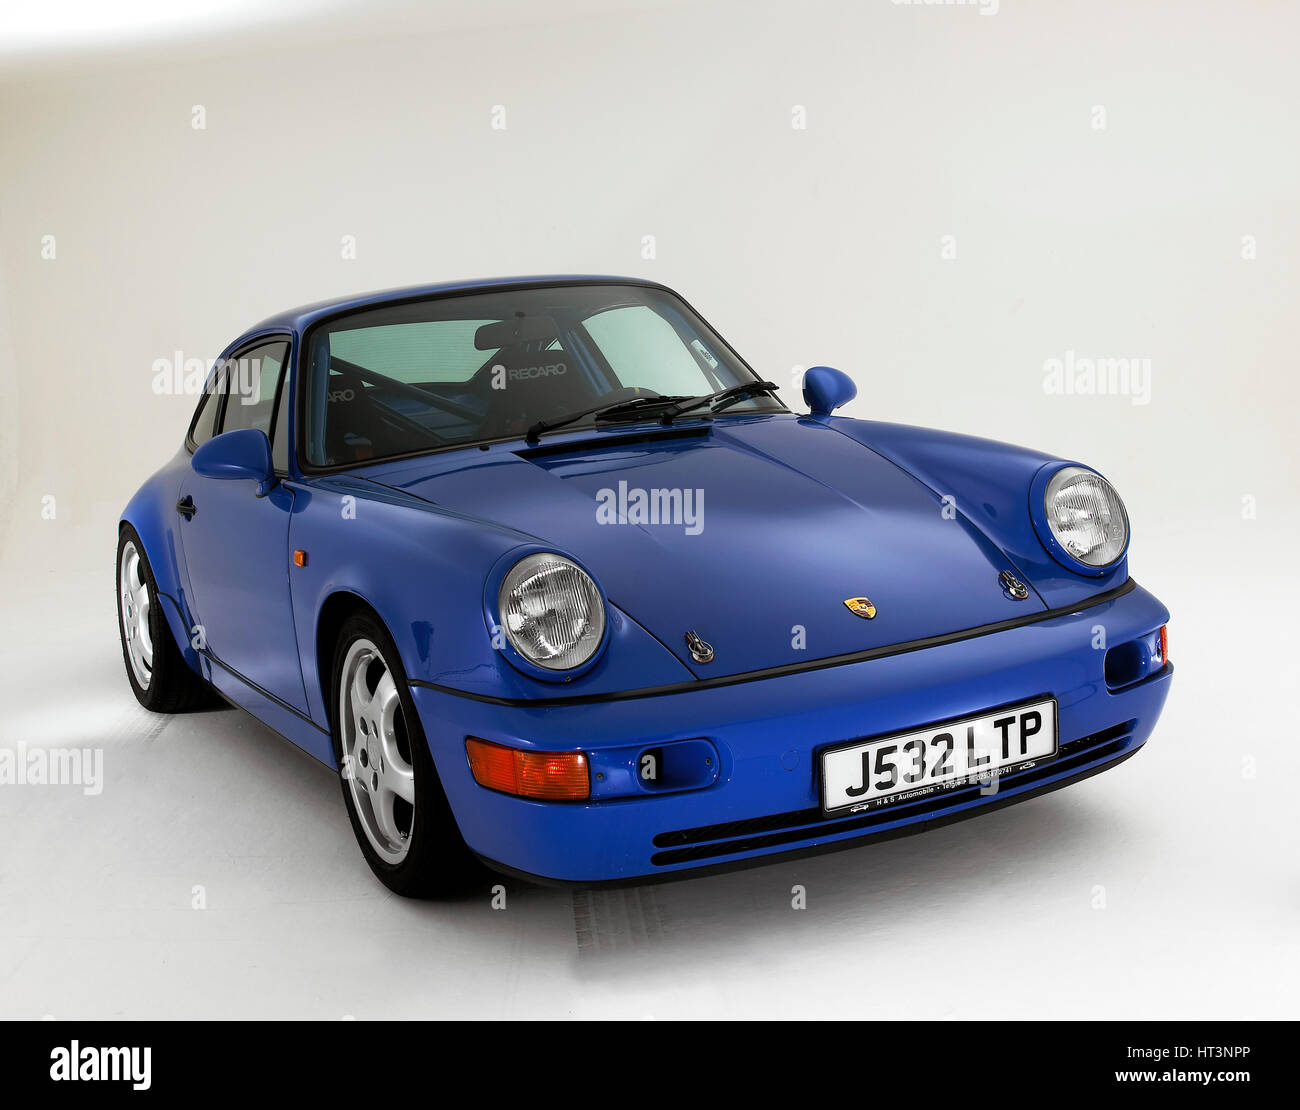 Porsche 964 Rs High Resolution Stock Photography and Images - Alamy